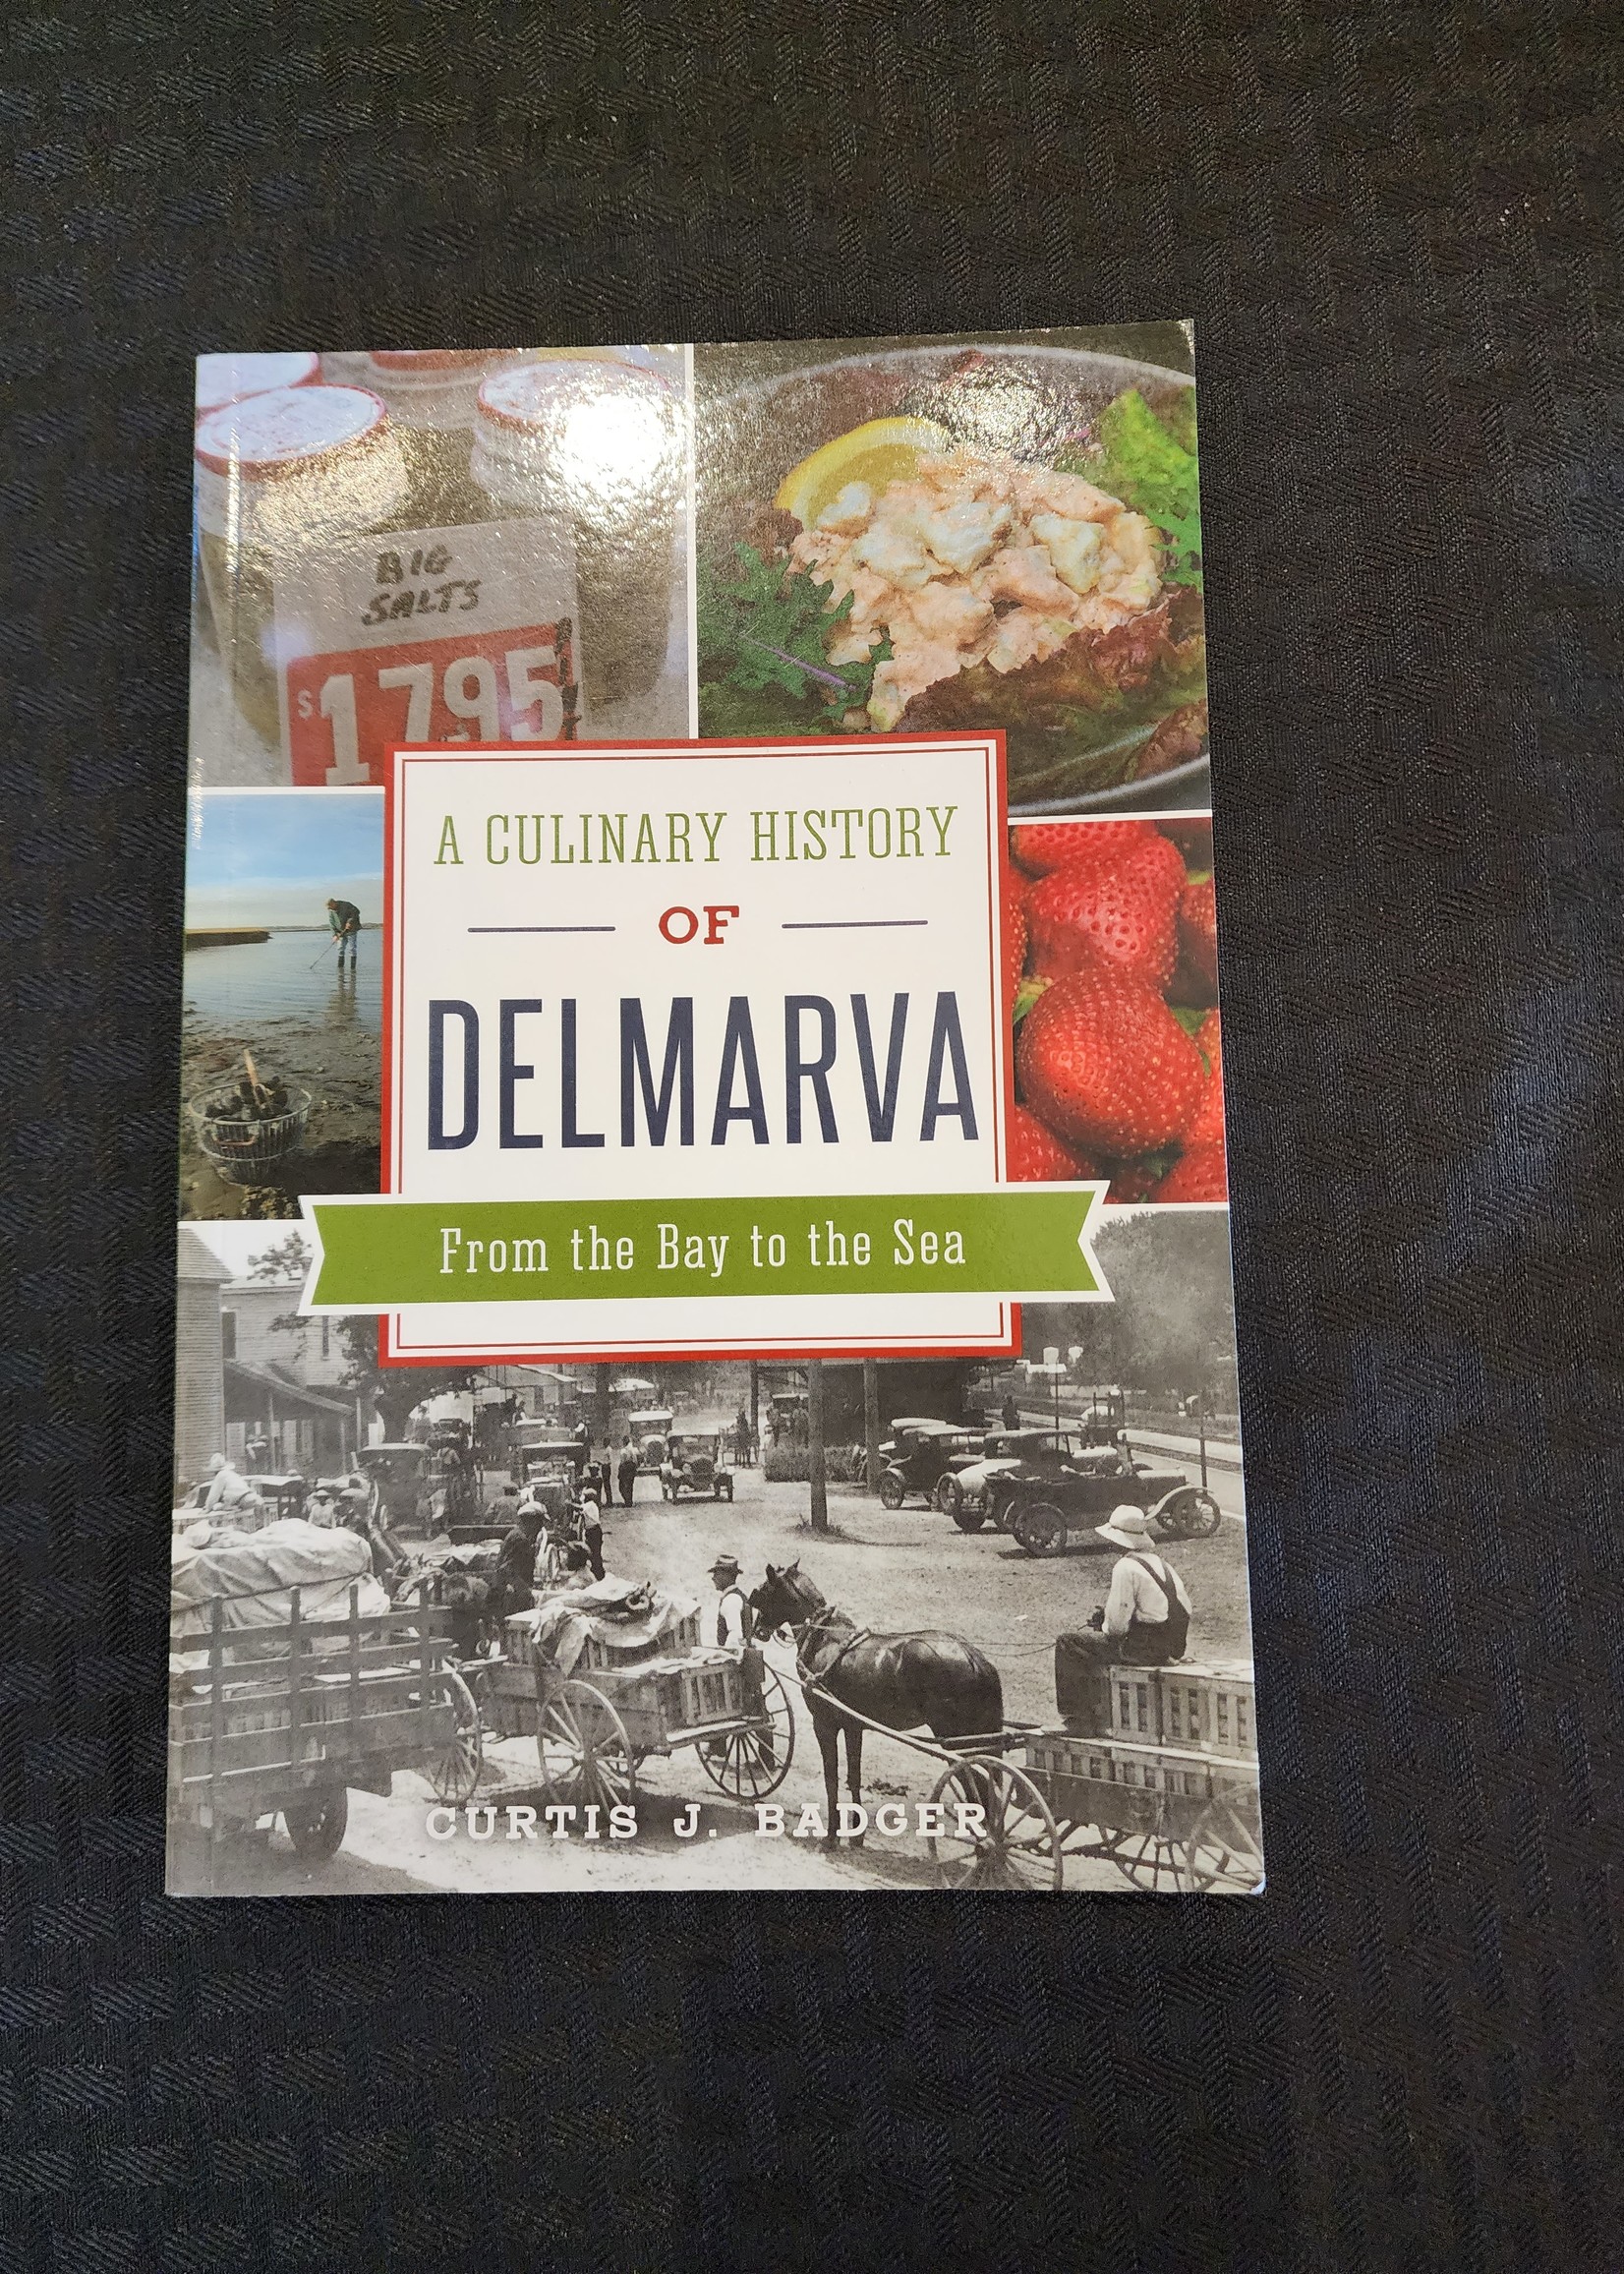 Curtis Badger Culinary History of Delmarva: From the Bay to the Sea